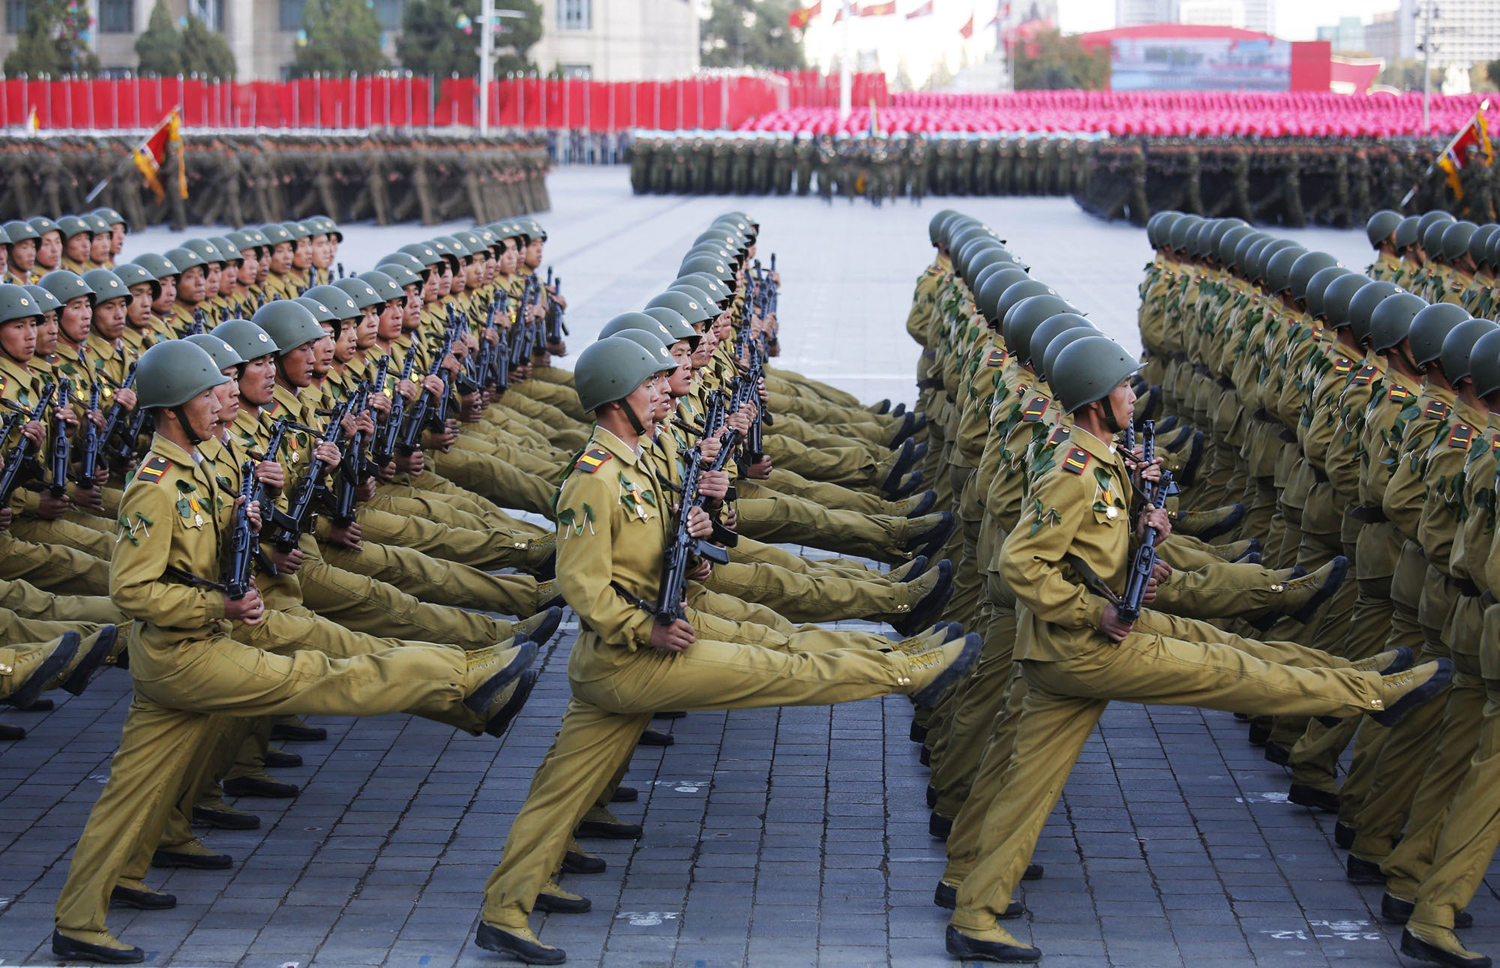 North Korea Marks 70 Years of Workers’ Party Rule 08